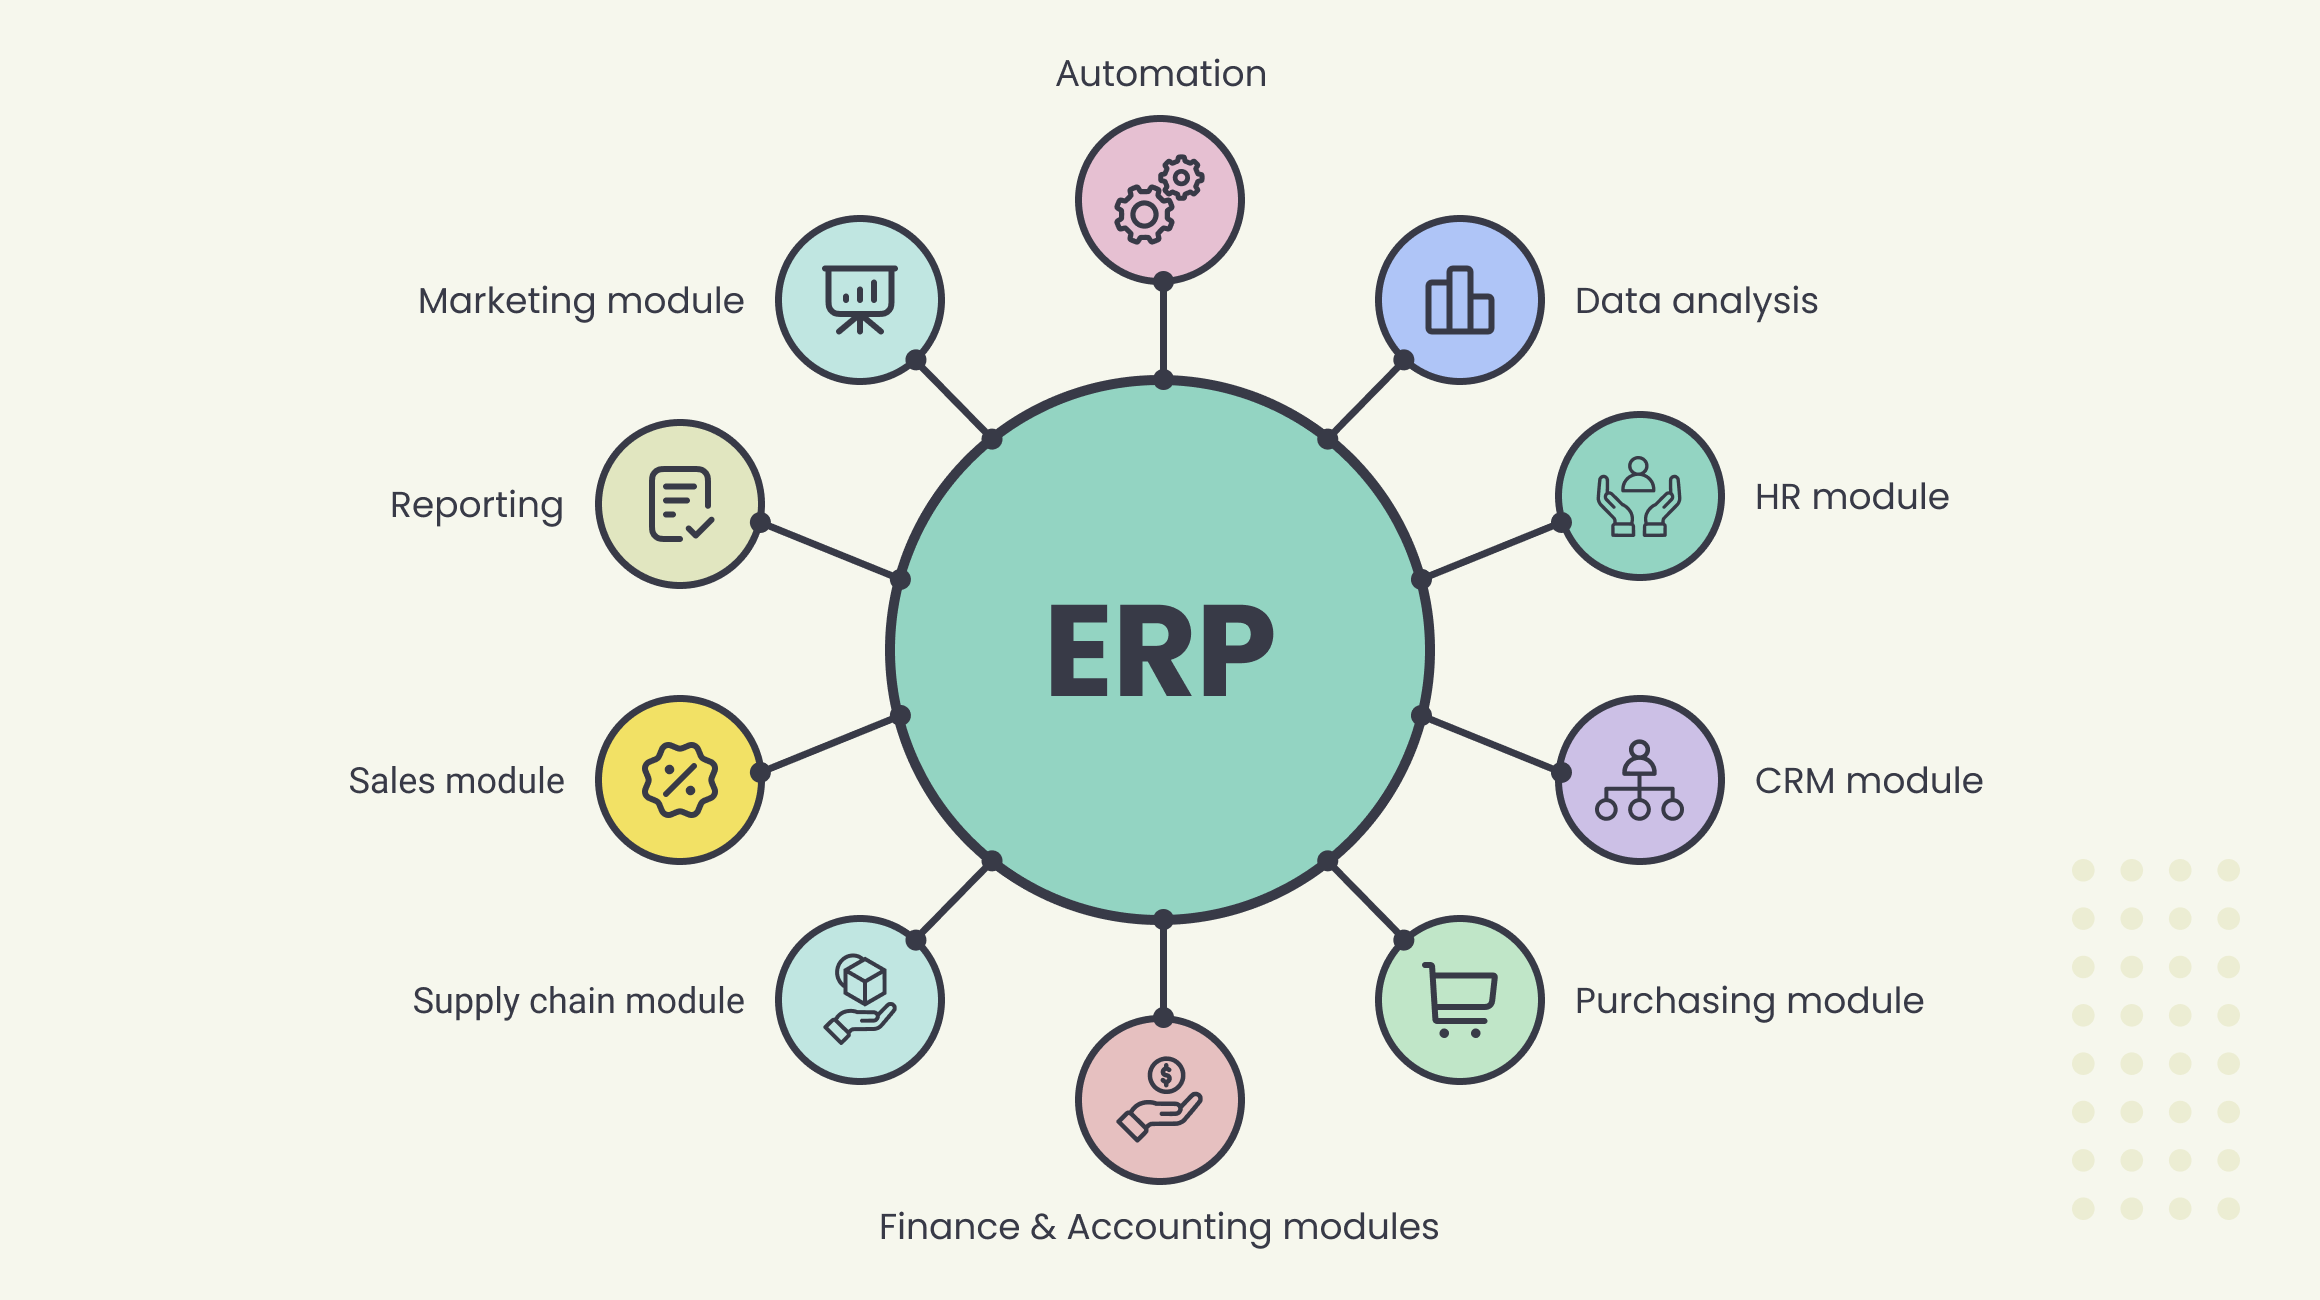 Features of ERP